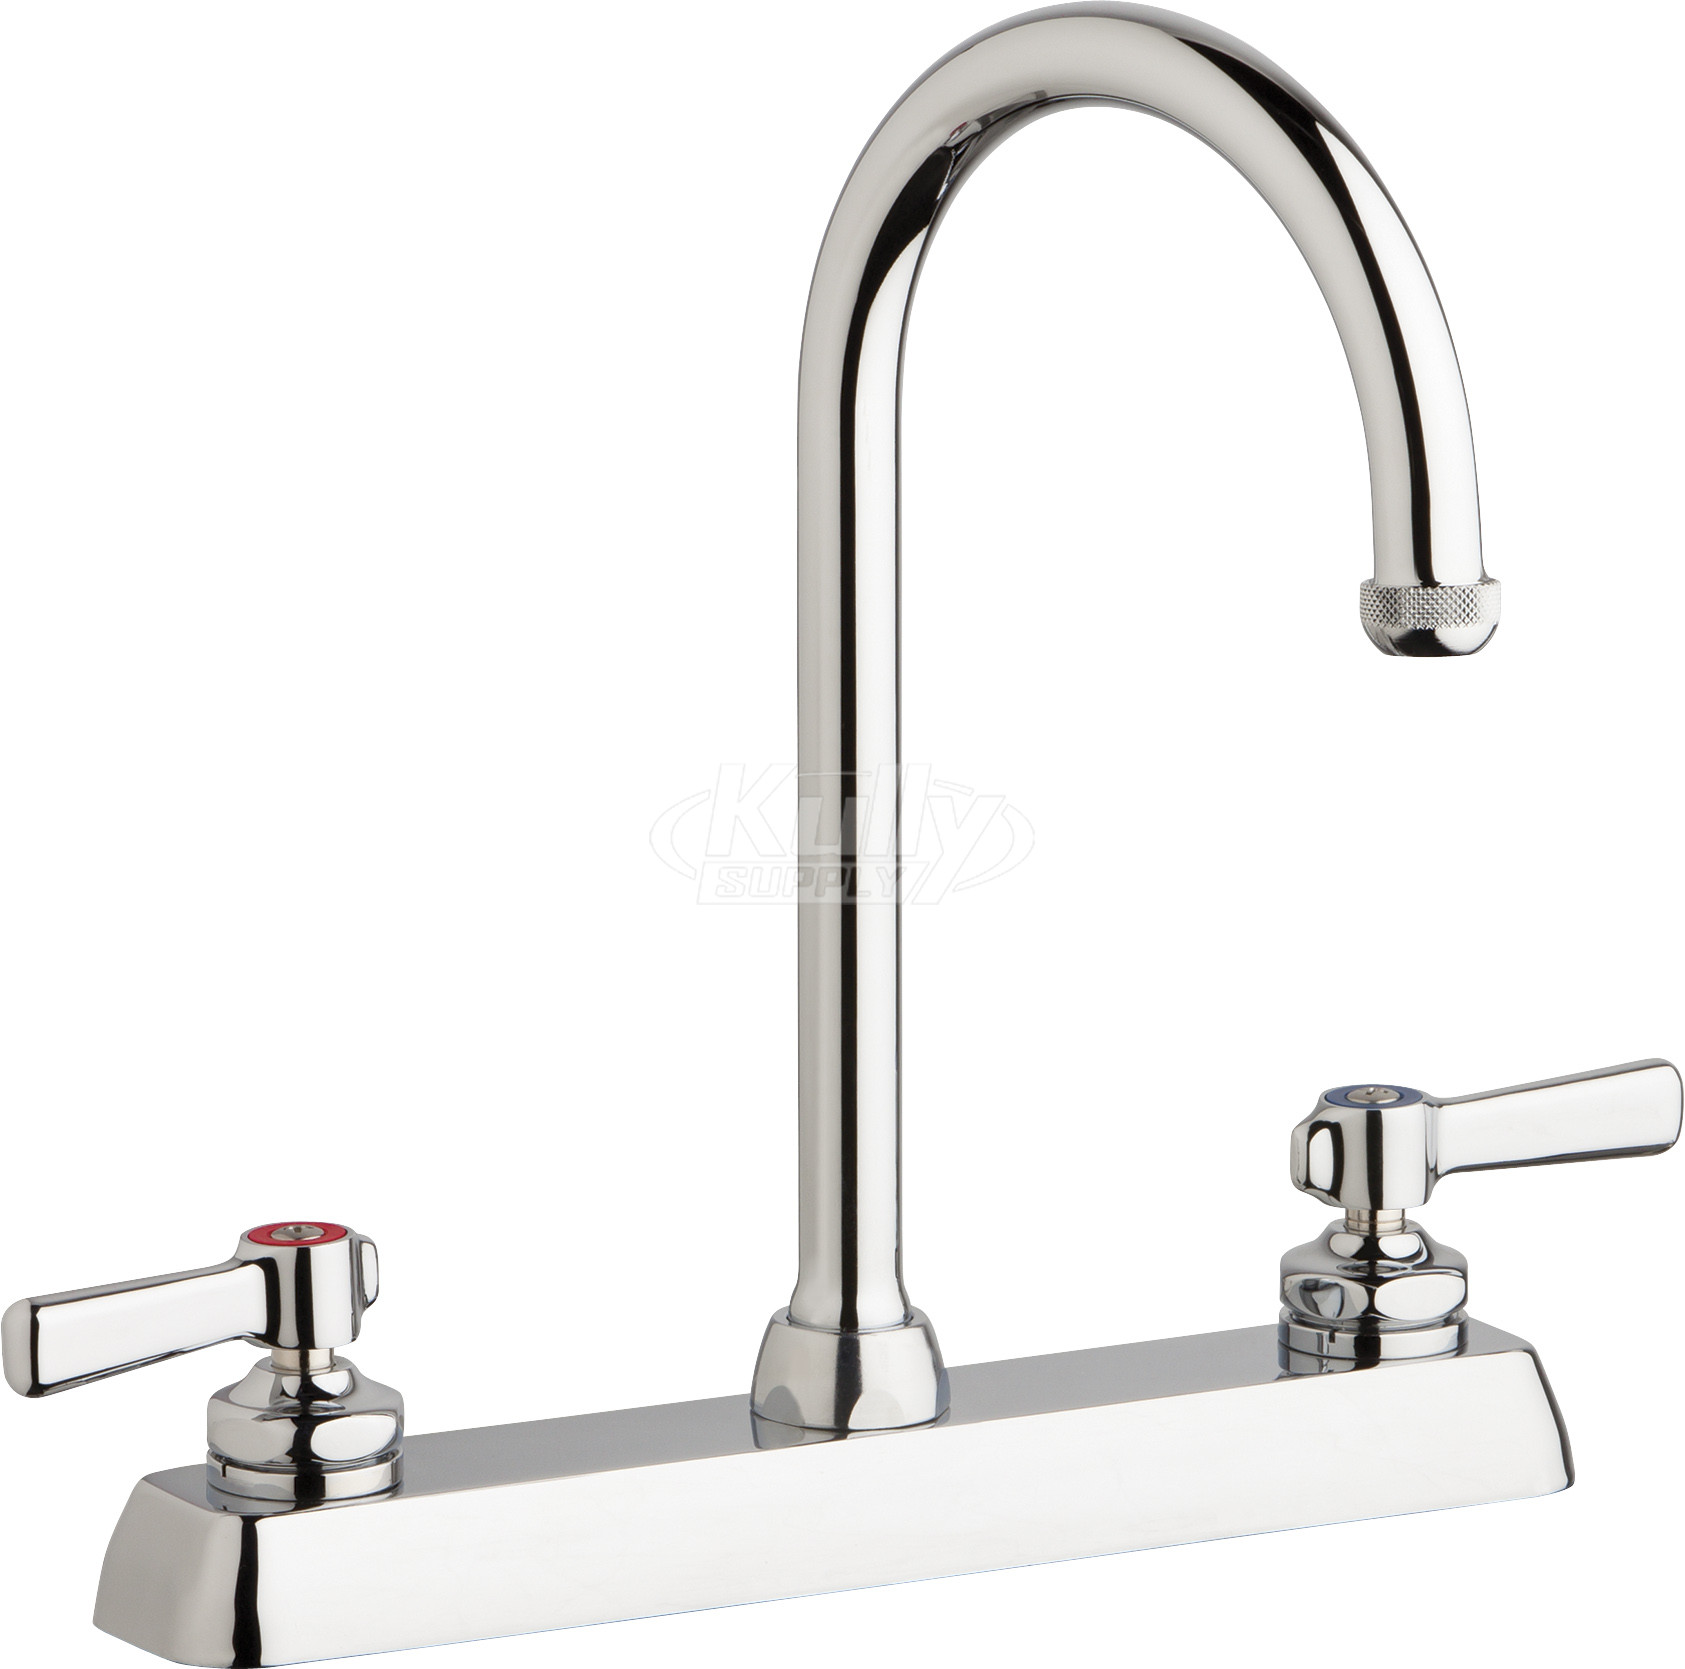 Chicago W8D-GN2AE1-369ABCP Hot and Cold Water Workboard Sink Faucet